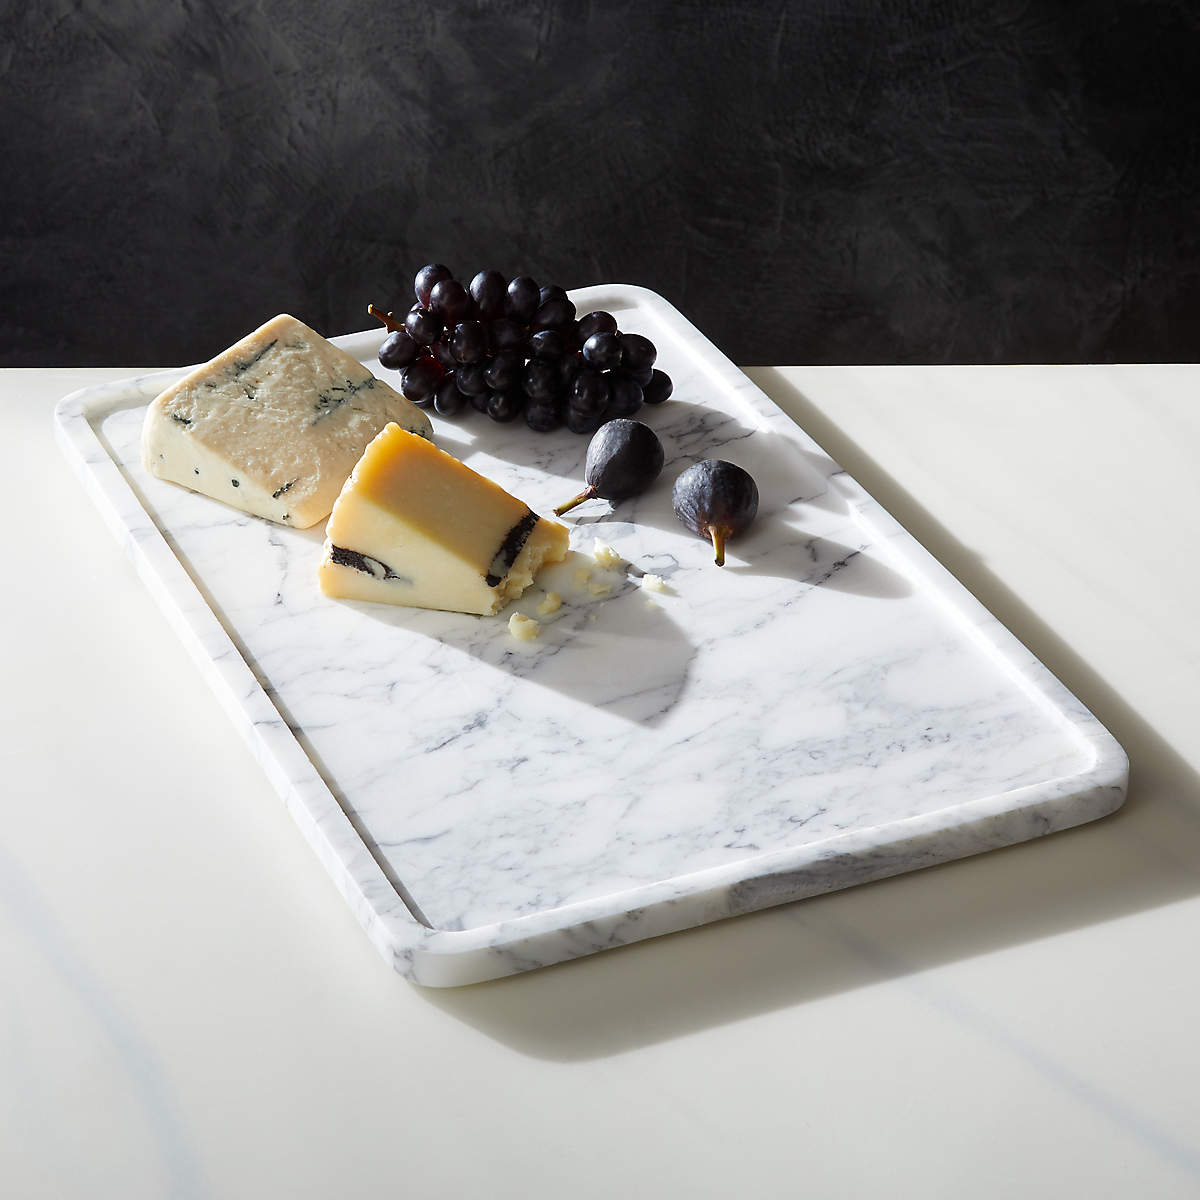 White Marble Serving Tray-Rectangle